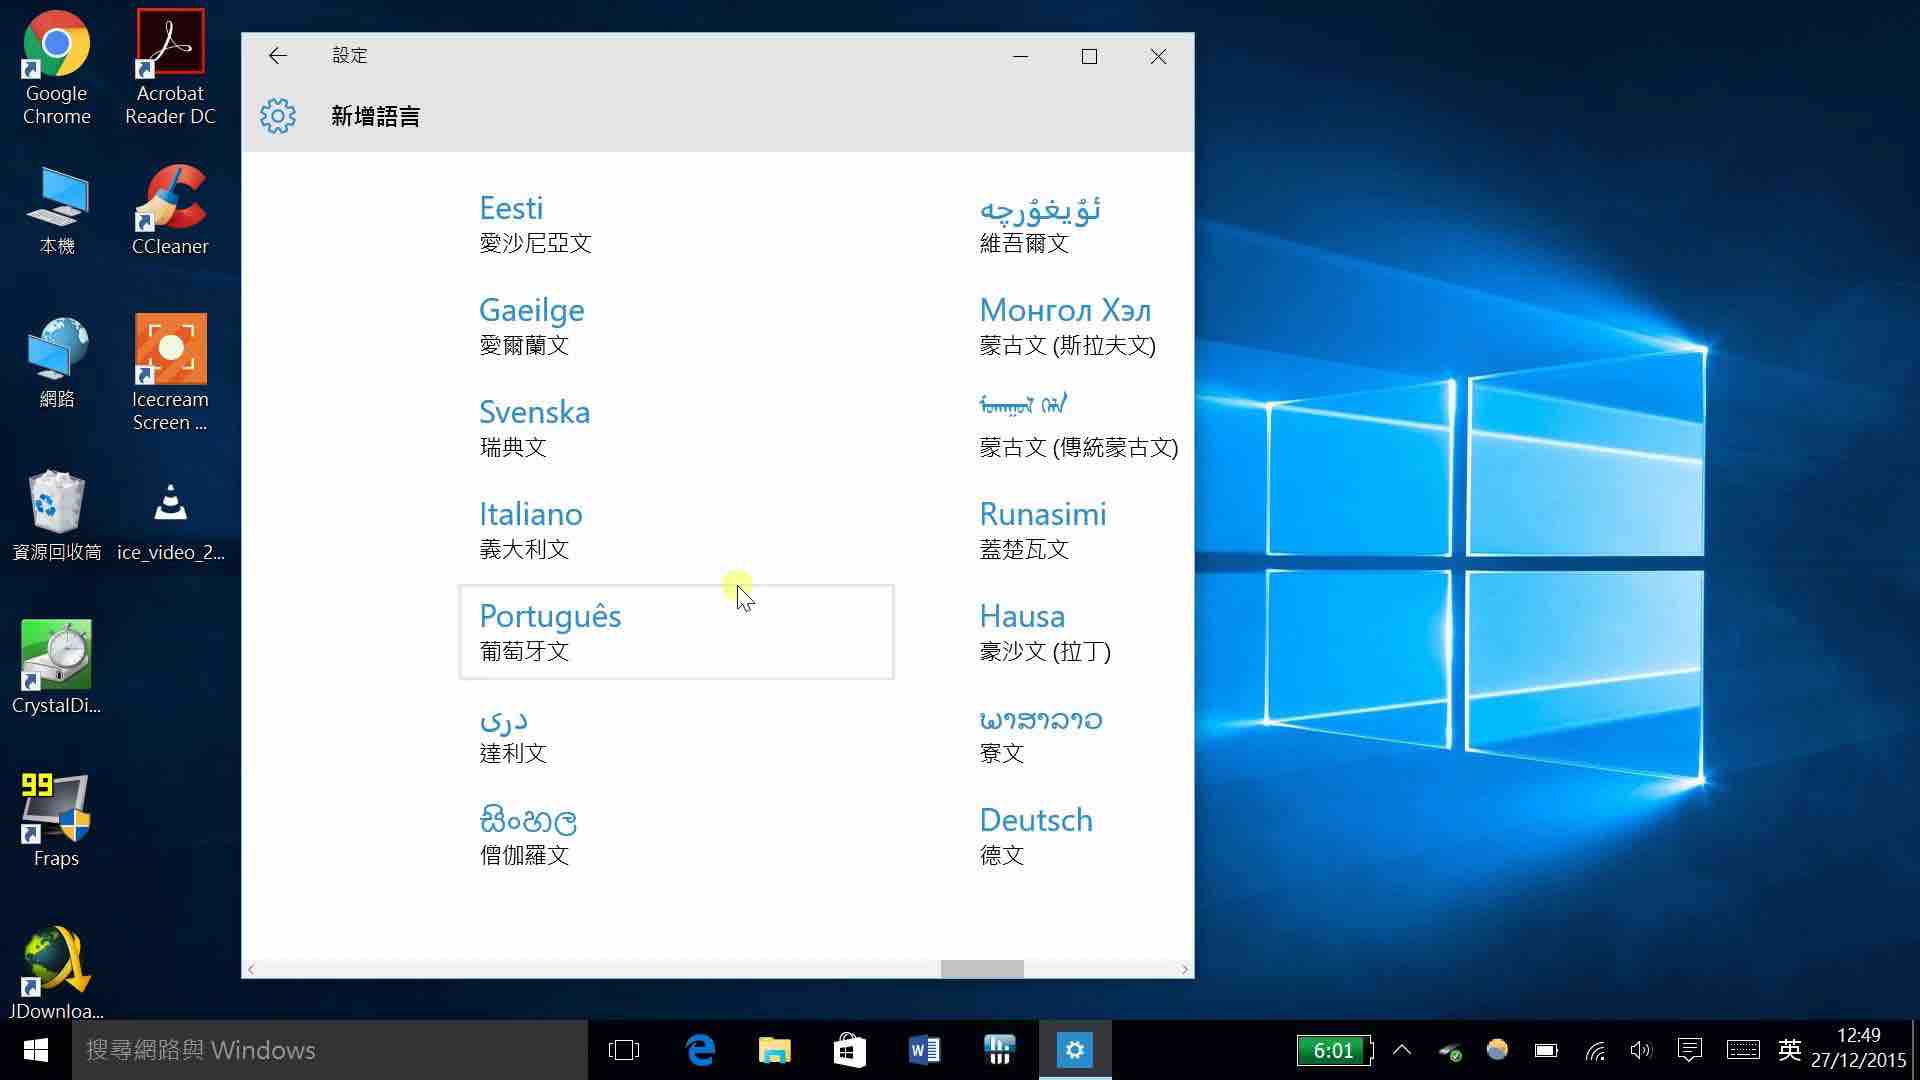 Microsoft Makes Special Windows 10 “Zhuangongban Edition” For Chinese Government1920 x 1080